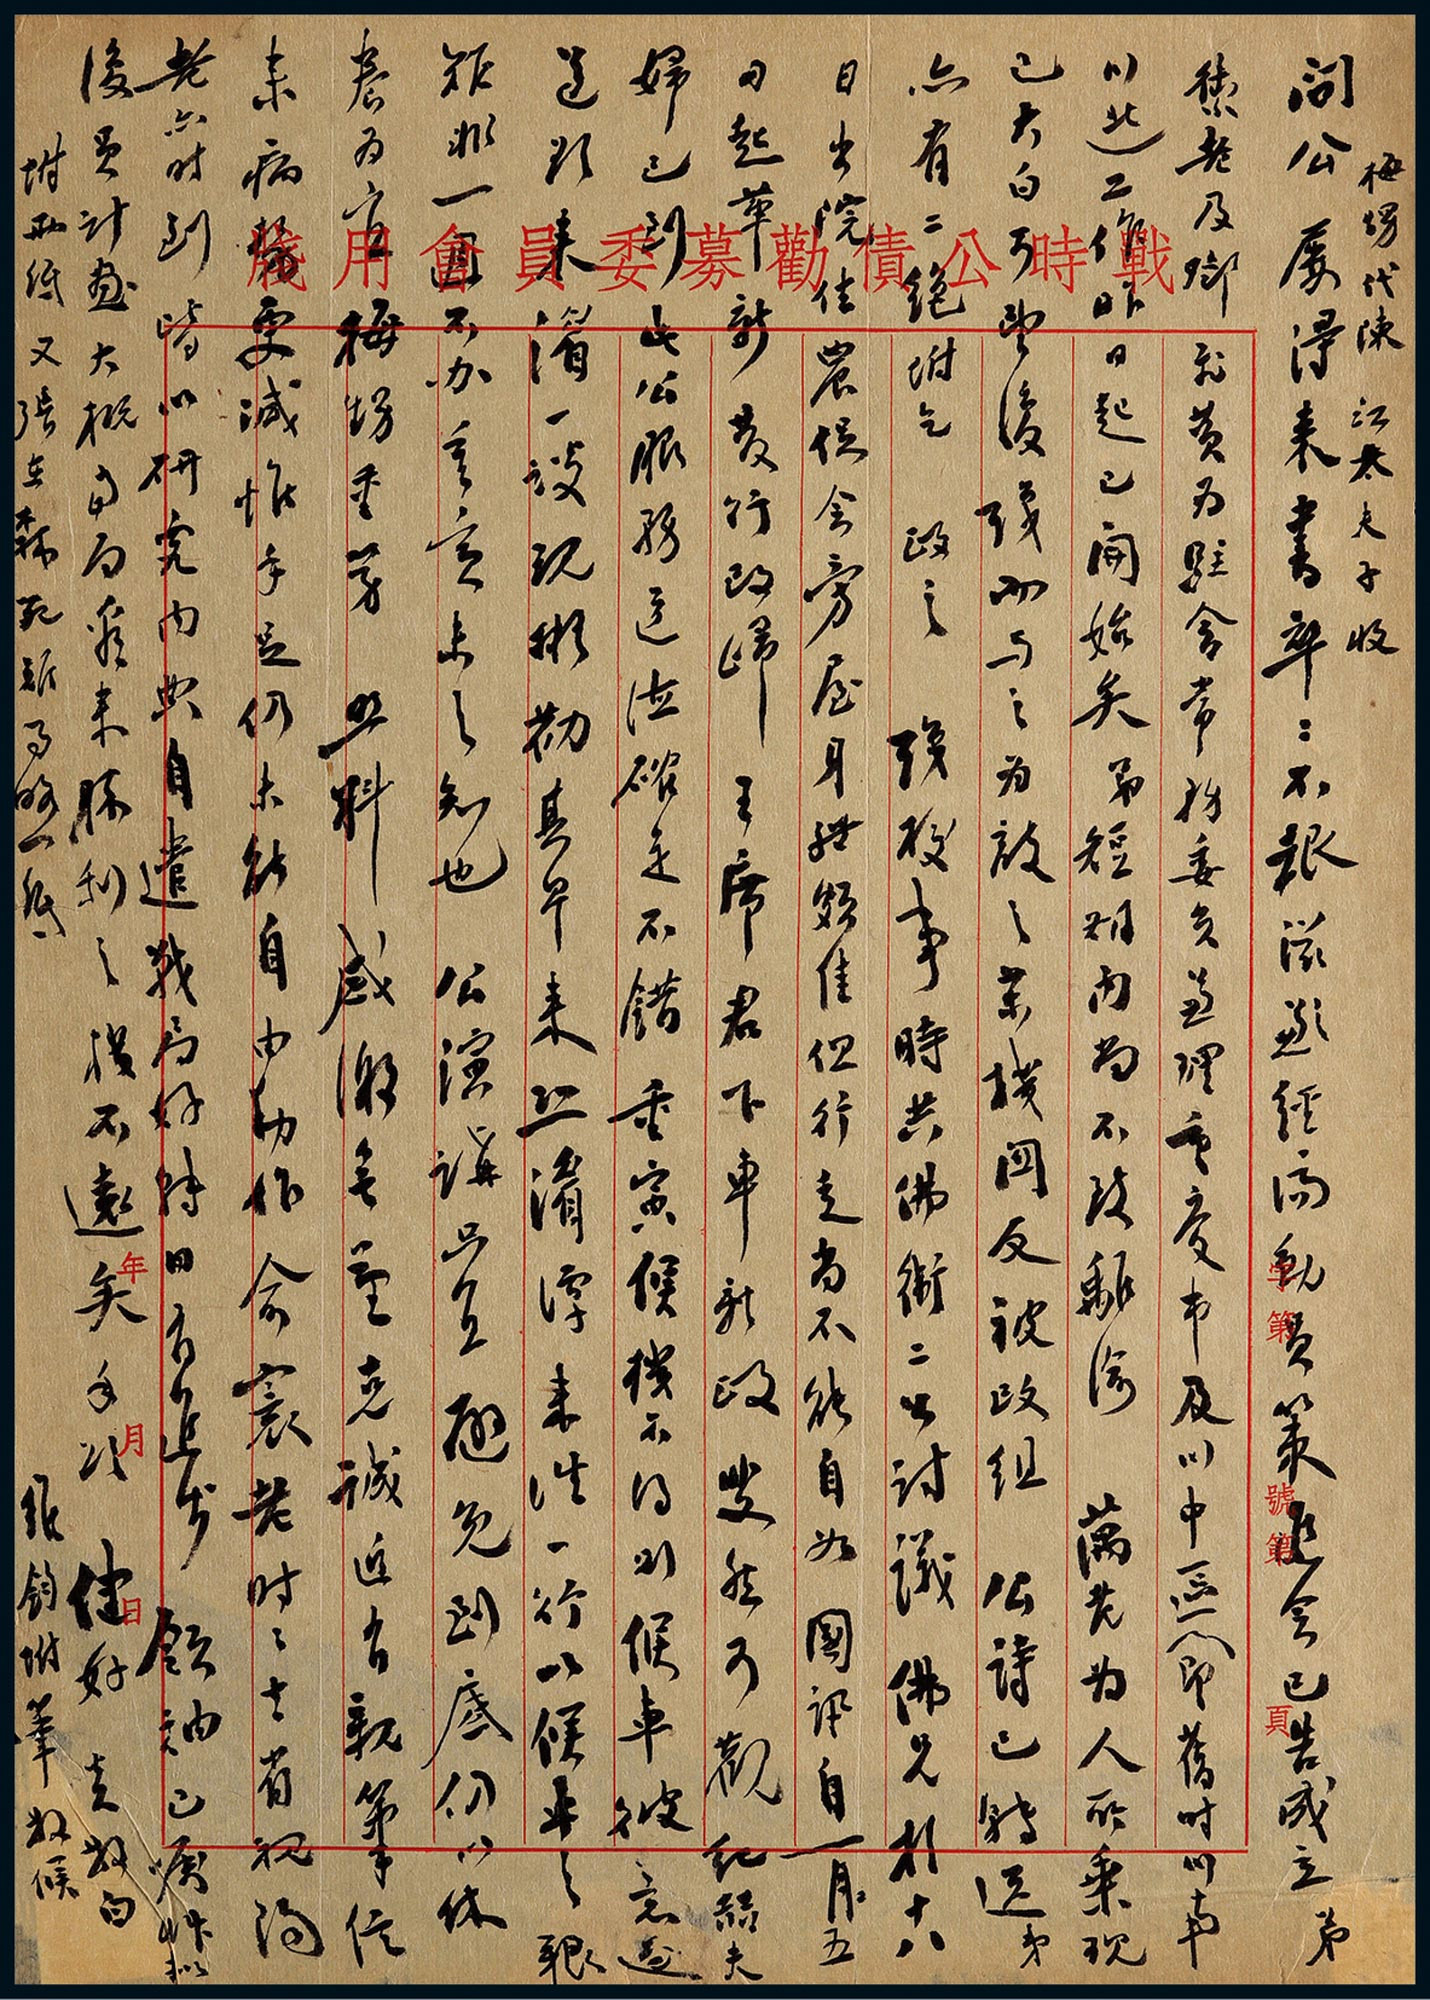 A letter from Huang Yanpei to Jiang Wenyu